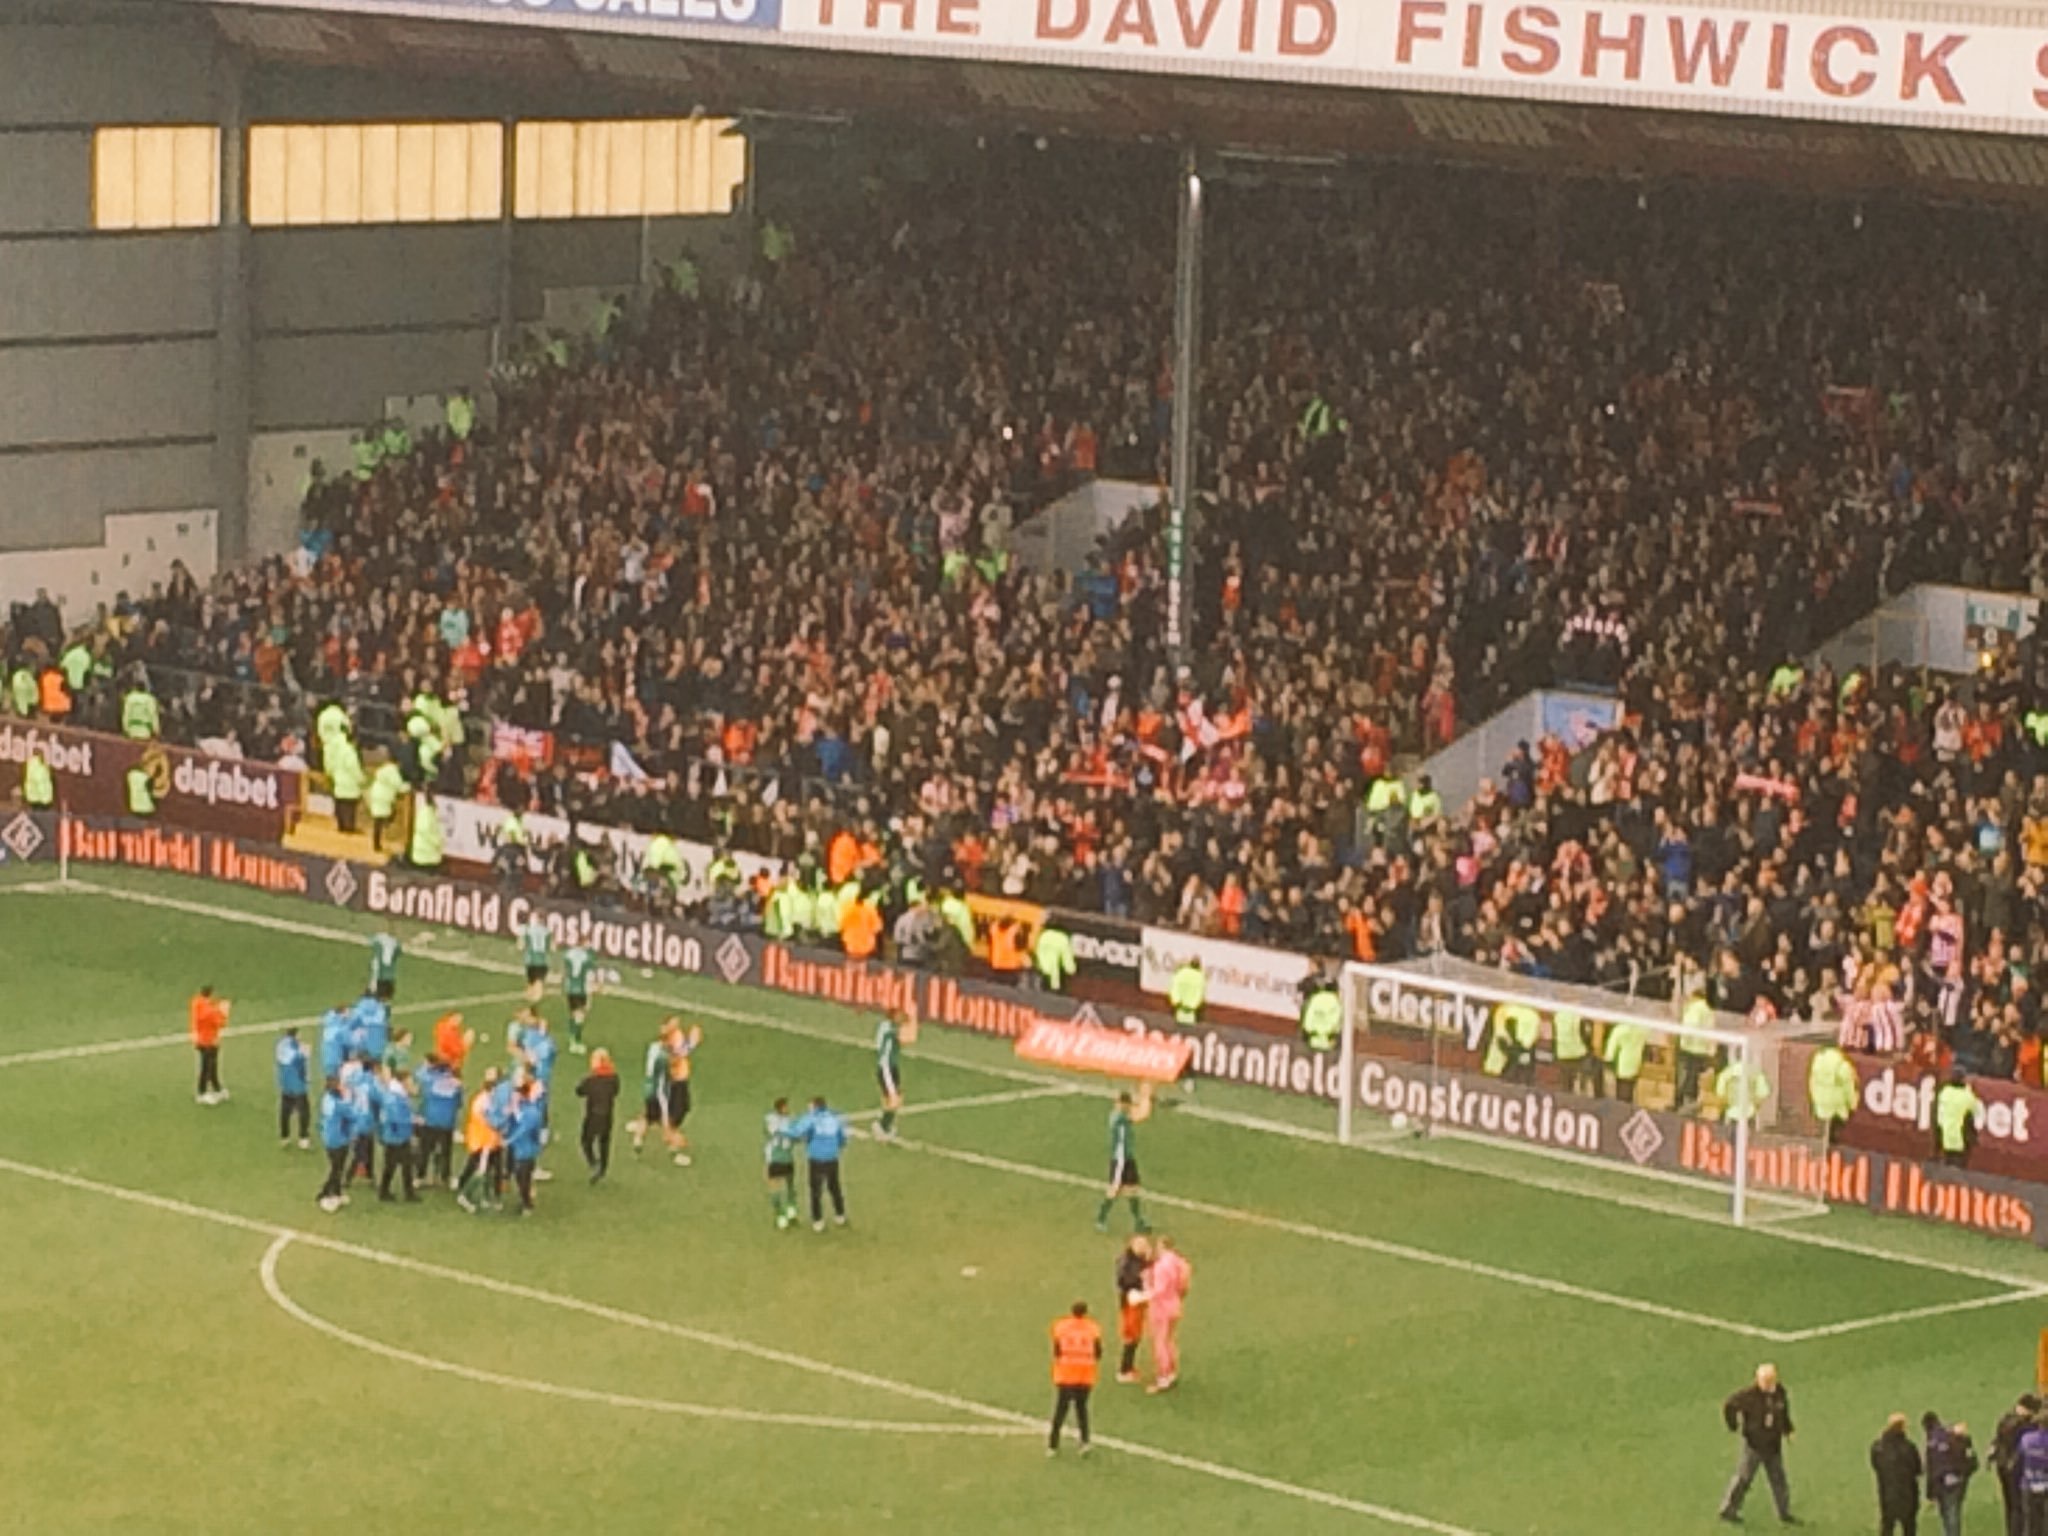 Lincoln's players celebrate with their fans after beating Burnley at Turf Moor. (Photo: James Williams)